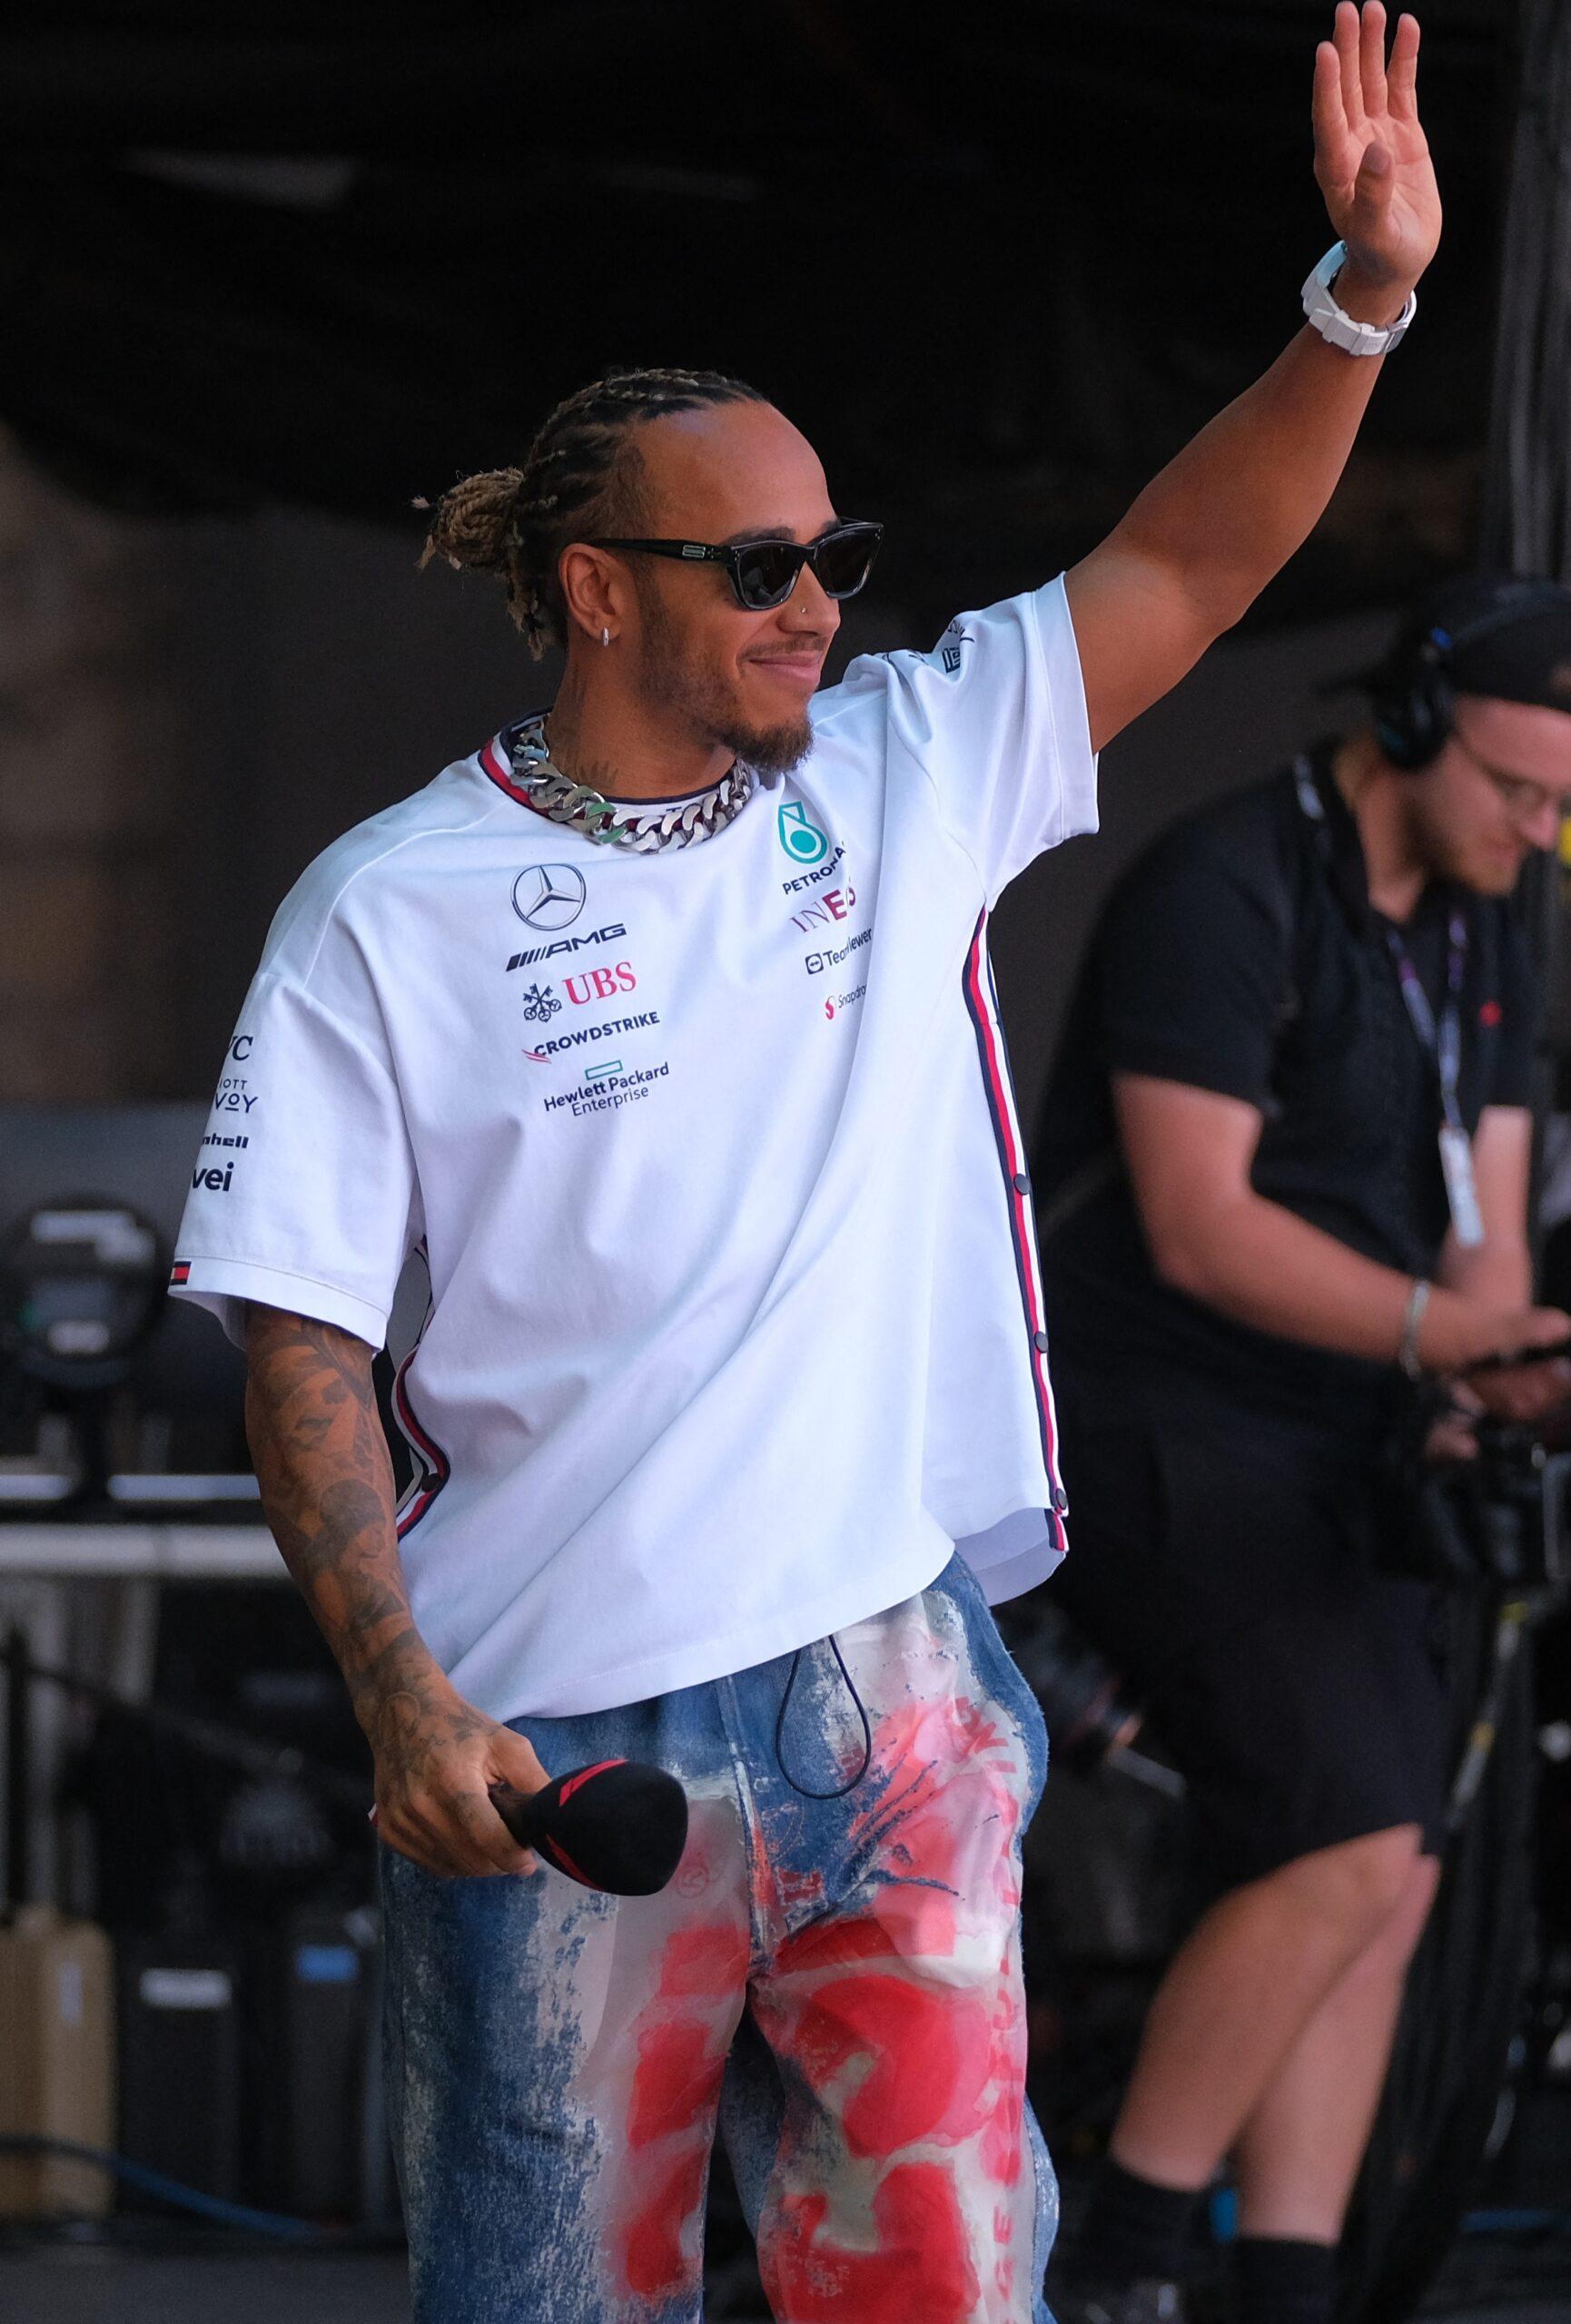 Lewis Hamilton during the Circuit of the America (COTA) F1 Race week in Austin, TX.